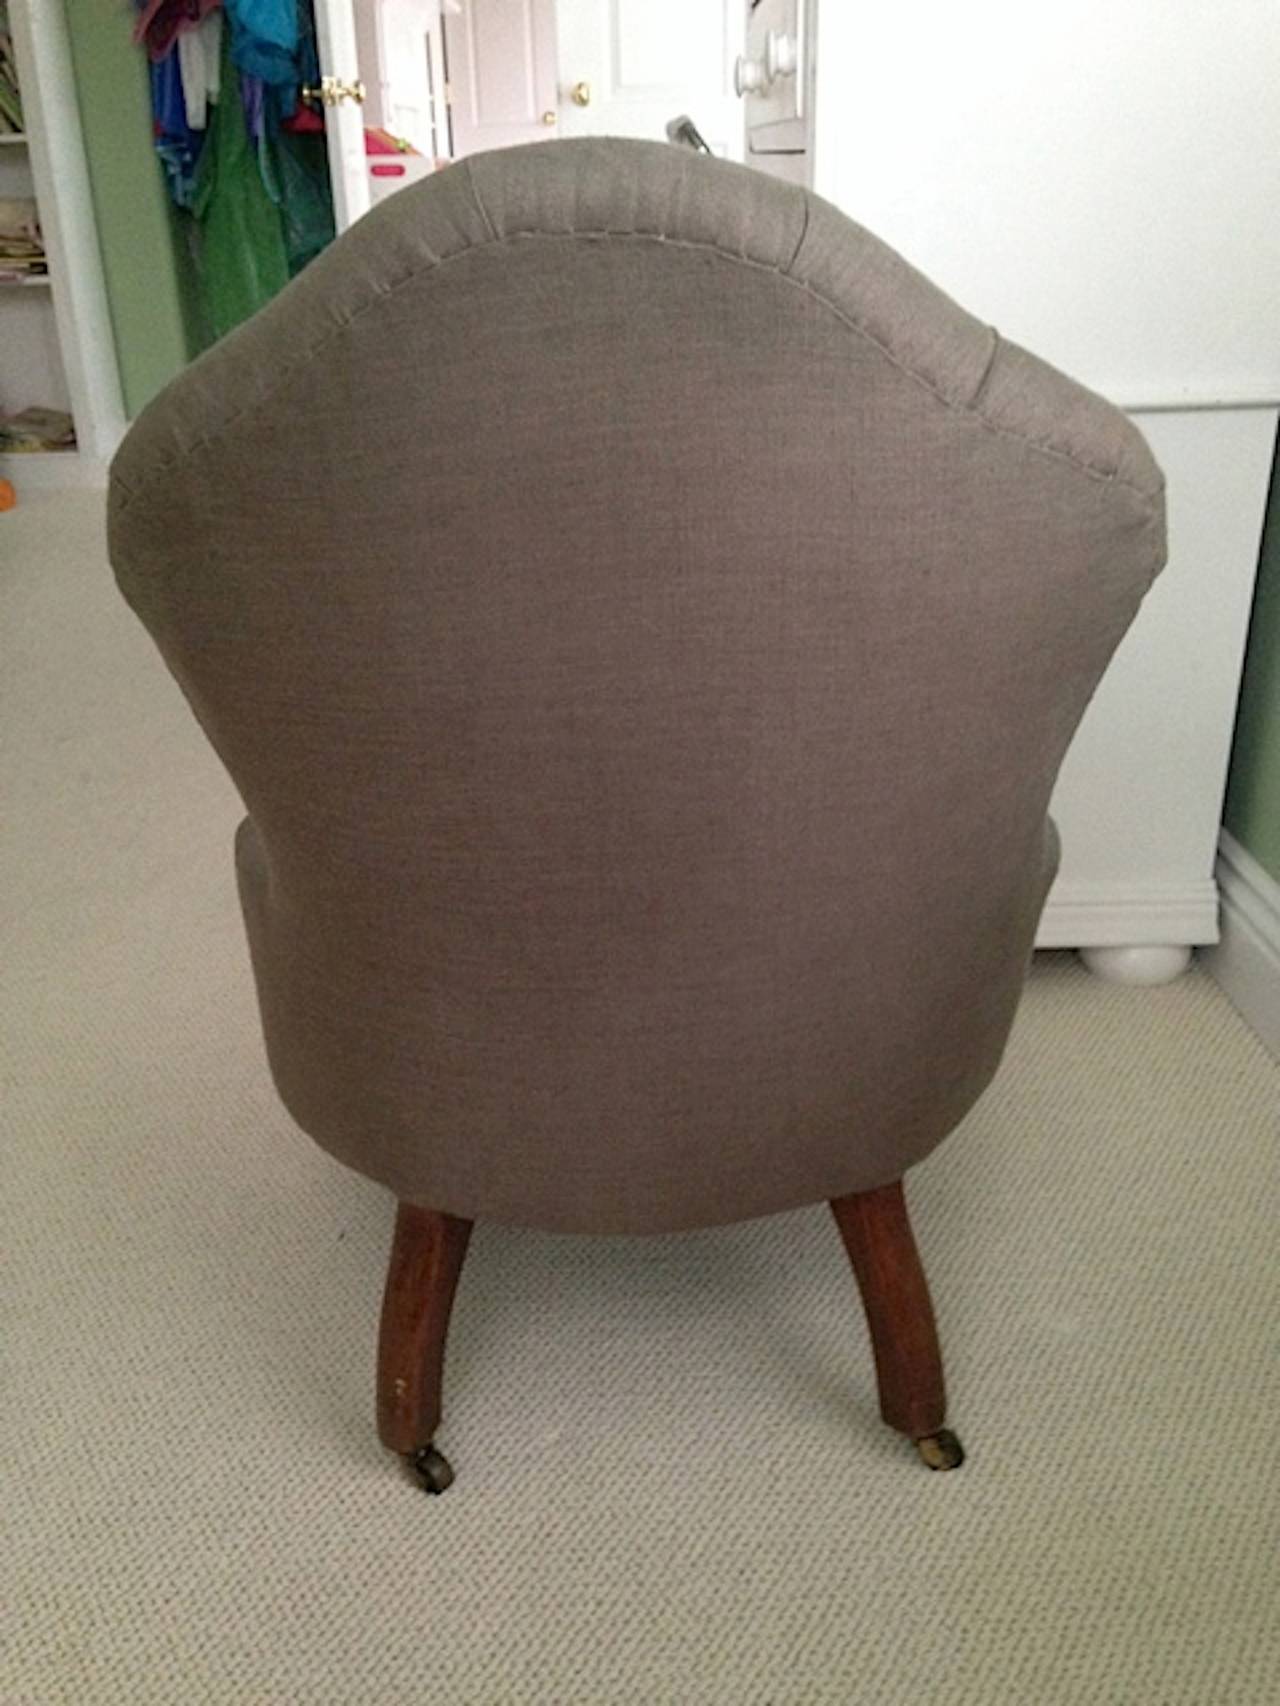 A nursing chair or low fireside chair newly upholstered in taupe Belgian linen with tufted back, turned front legs, saber back legs. The seat height is 11